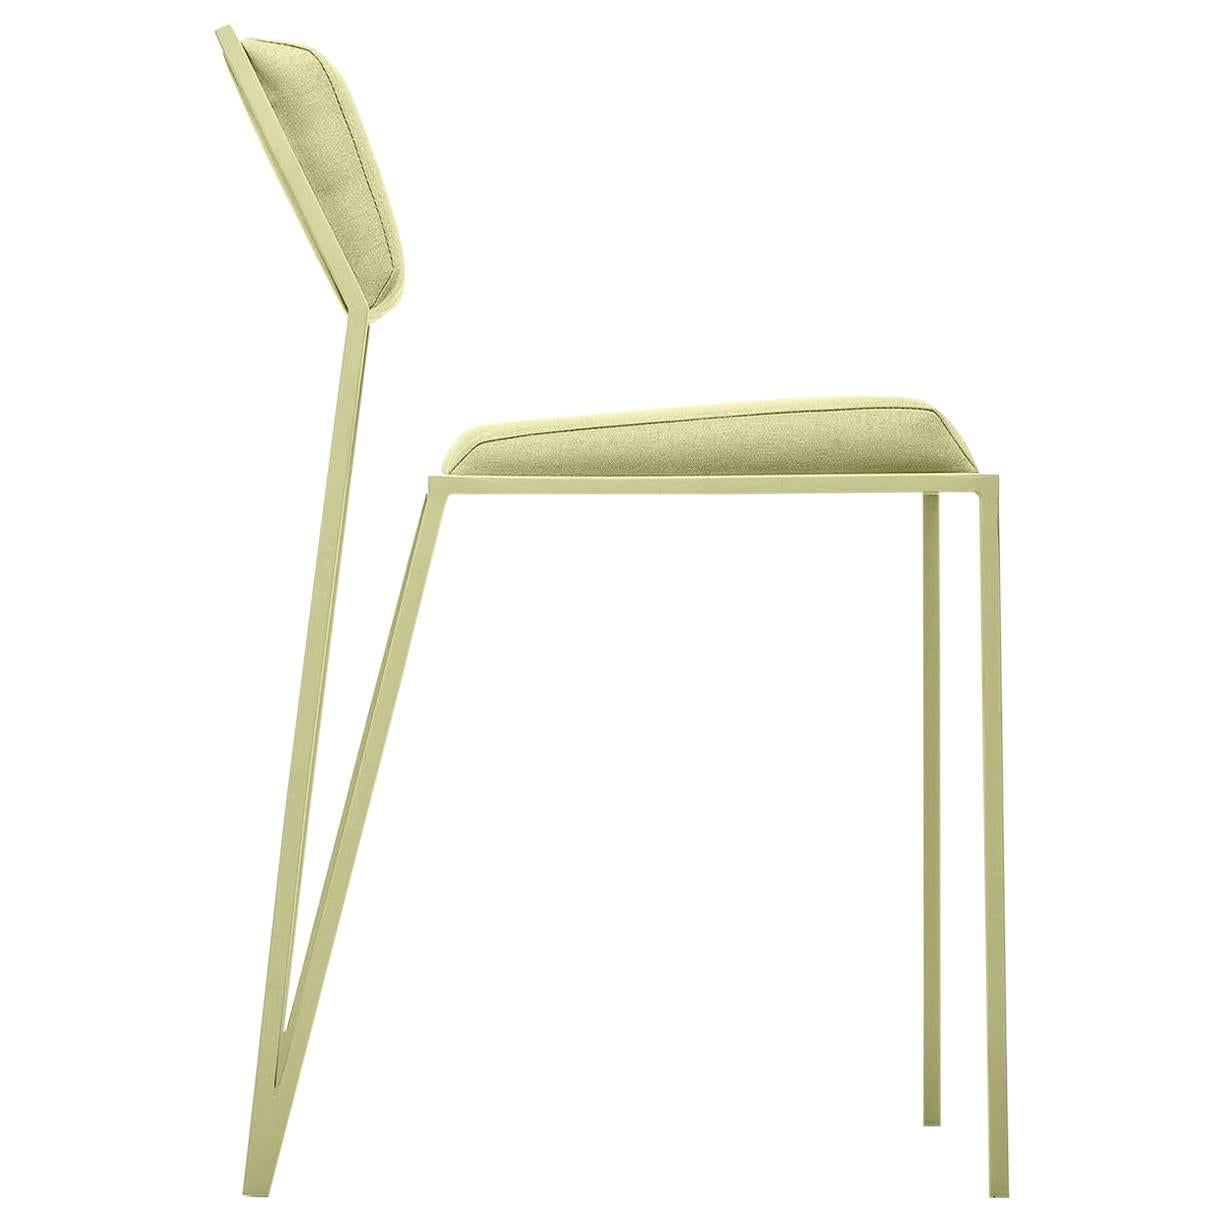 Minimalist Chair in Smooth Linen and Steel, Brazilian Contemporary Style, Olive